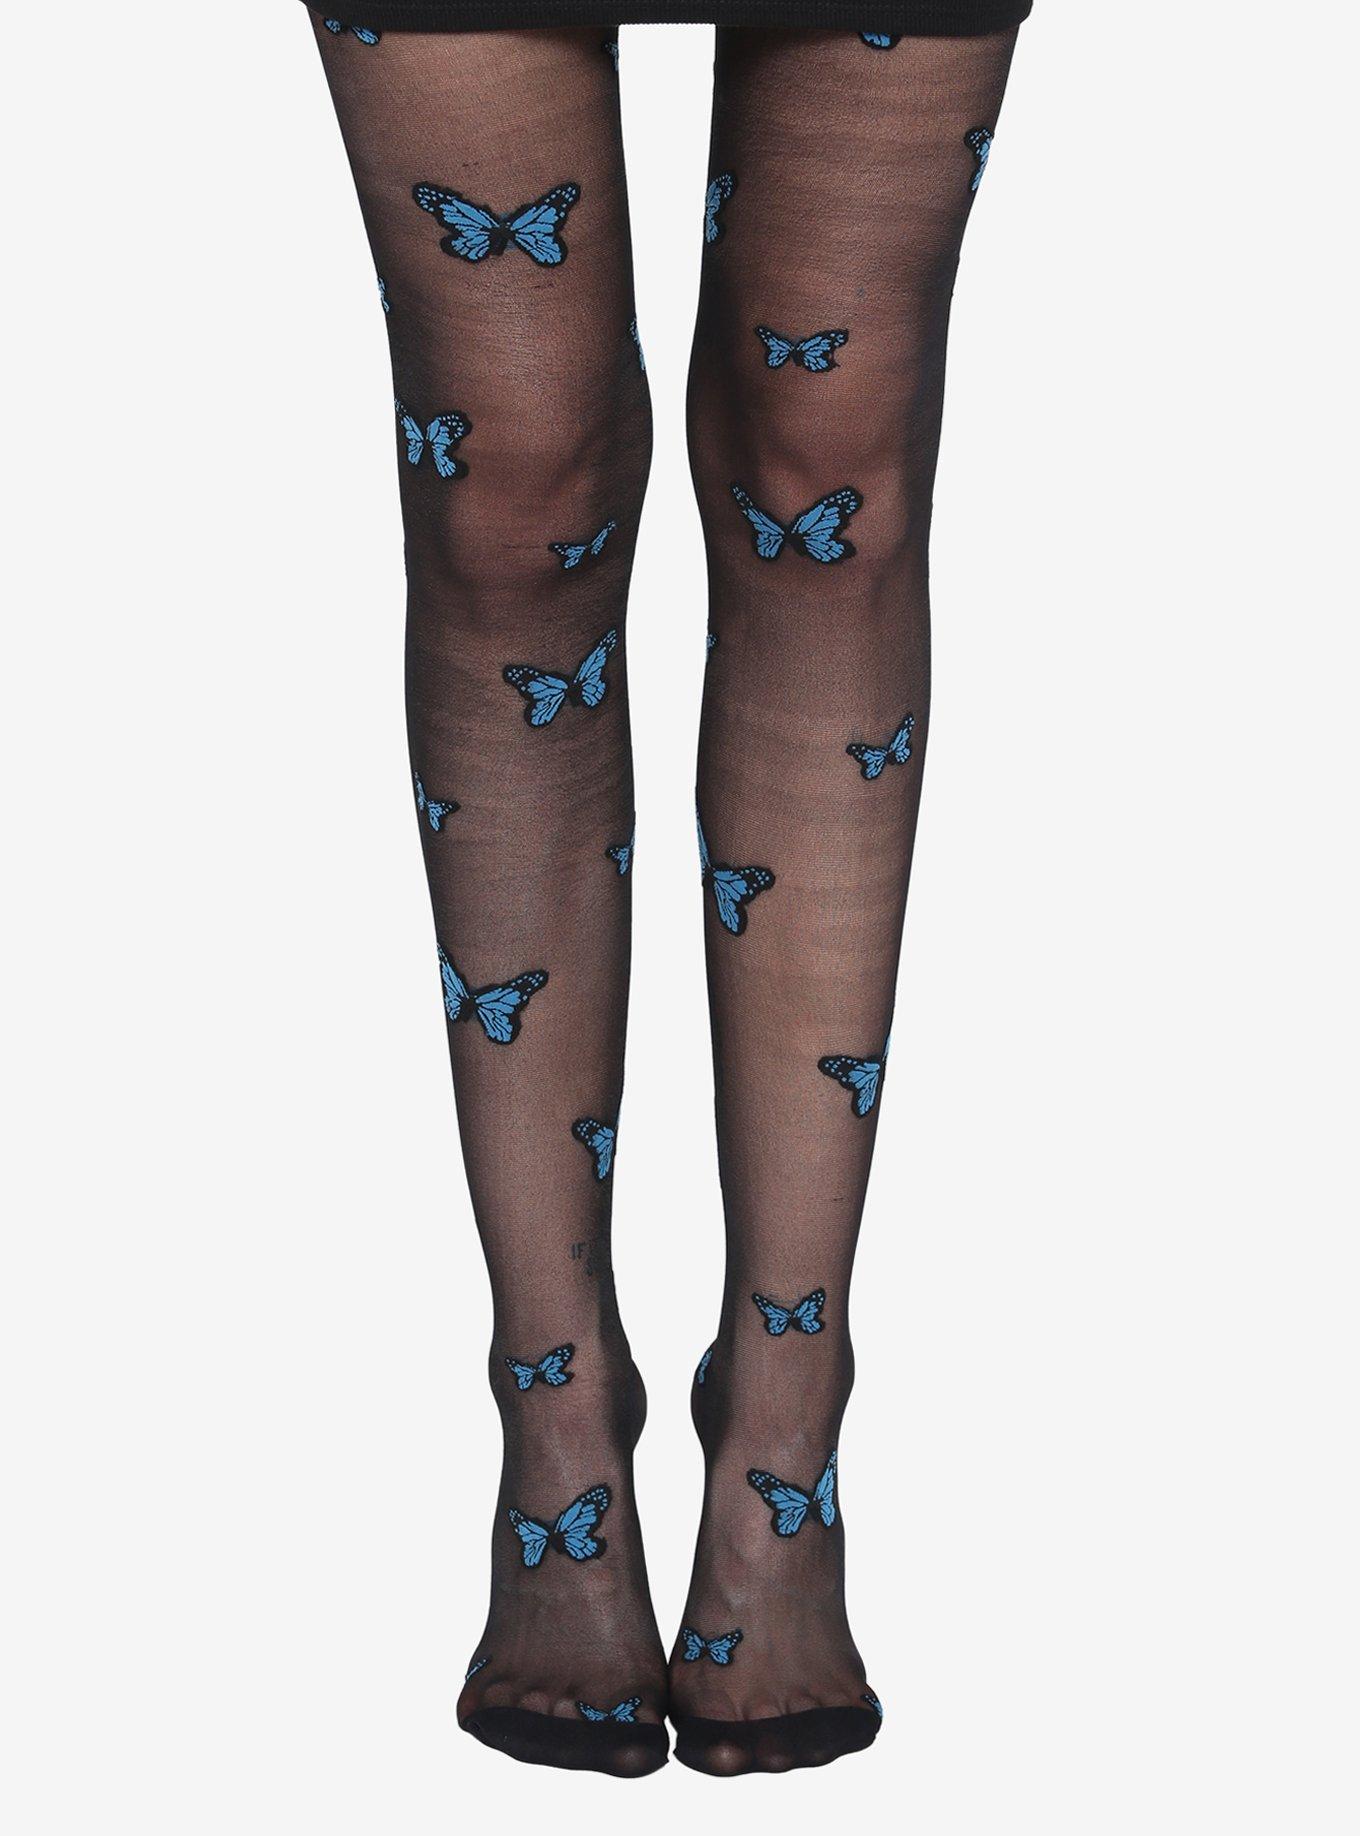 Butterfly Sheer Tight  Cool tights, Patterned tights, Cute tights